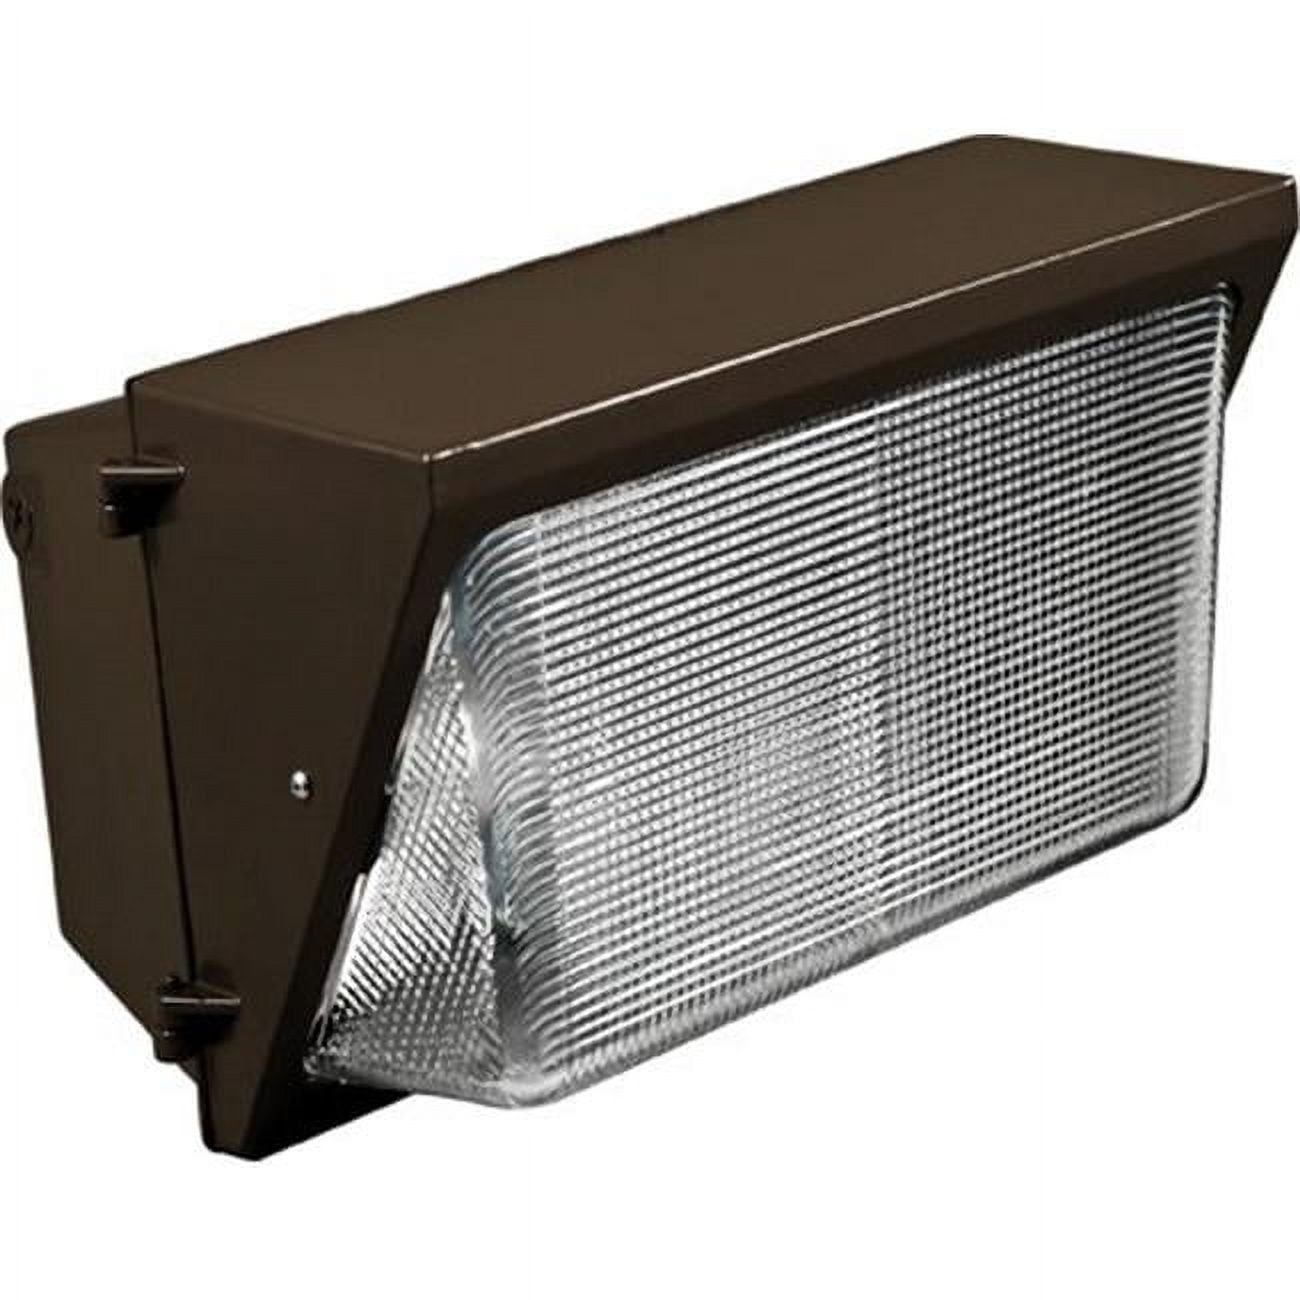 Dw-led1502 13.38 X 18 X 9 In. 120-277 V 50 Watts Large Wall Pack Fixture With Led Board, Bronze